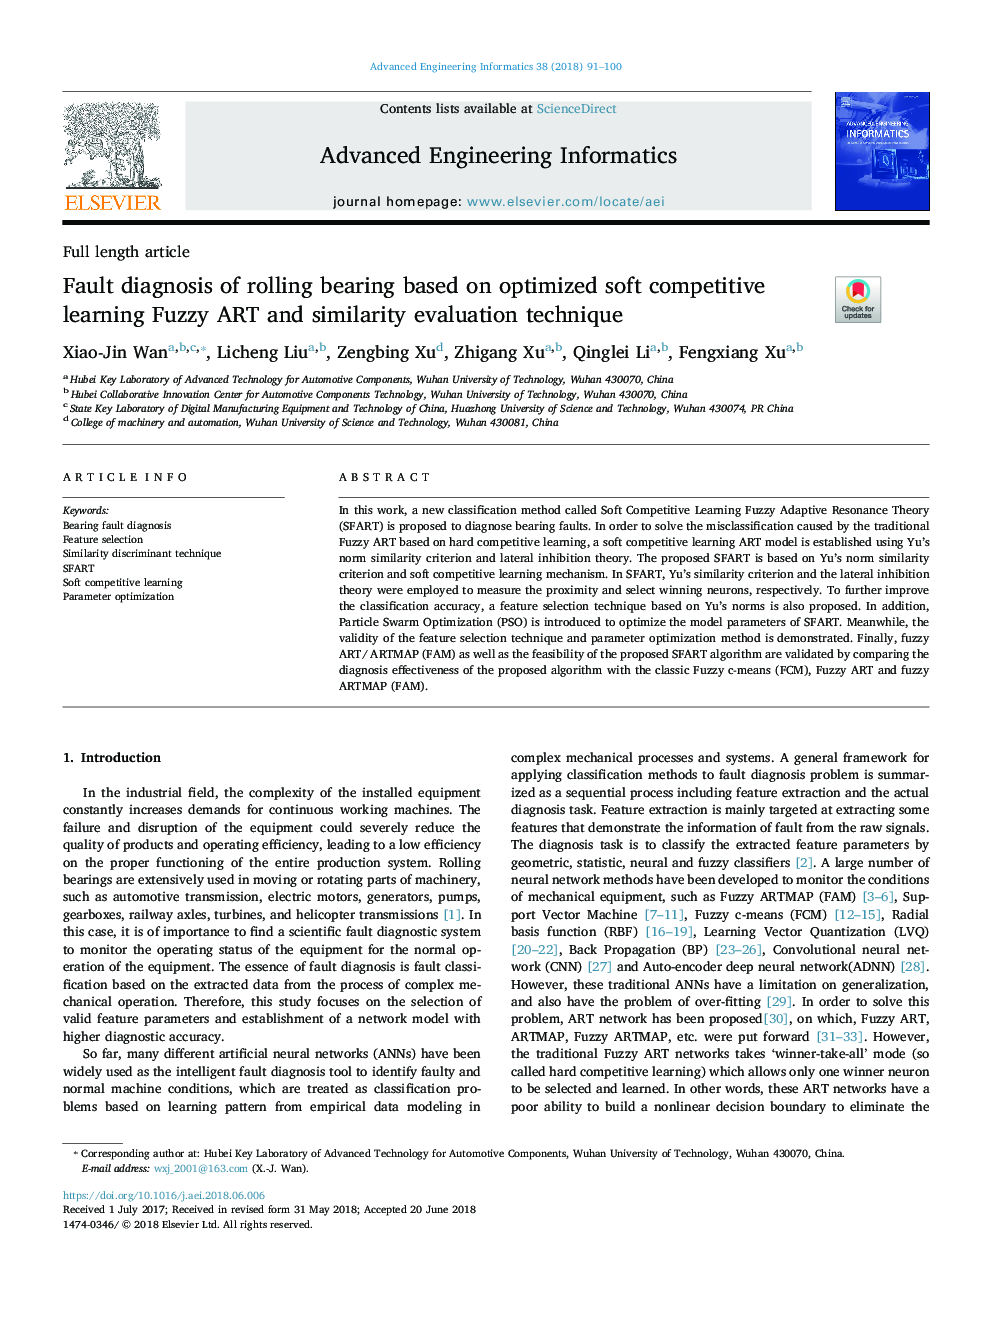 Fault diagnosis of rolling bearing based on optimized soft competitive learning Fuzzy ART and similarity evaluation technique